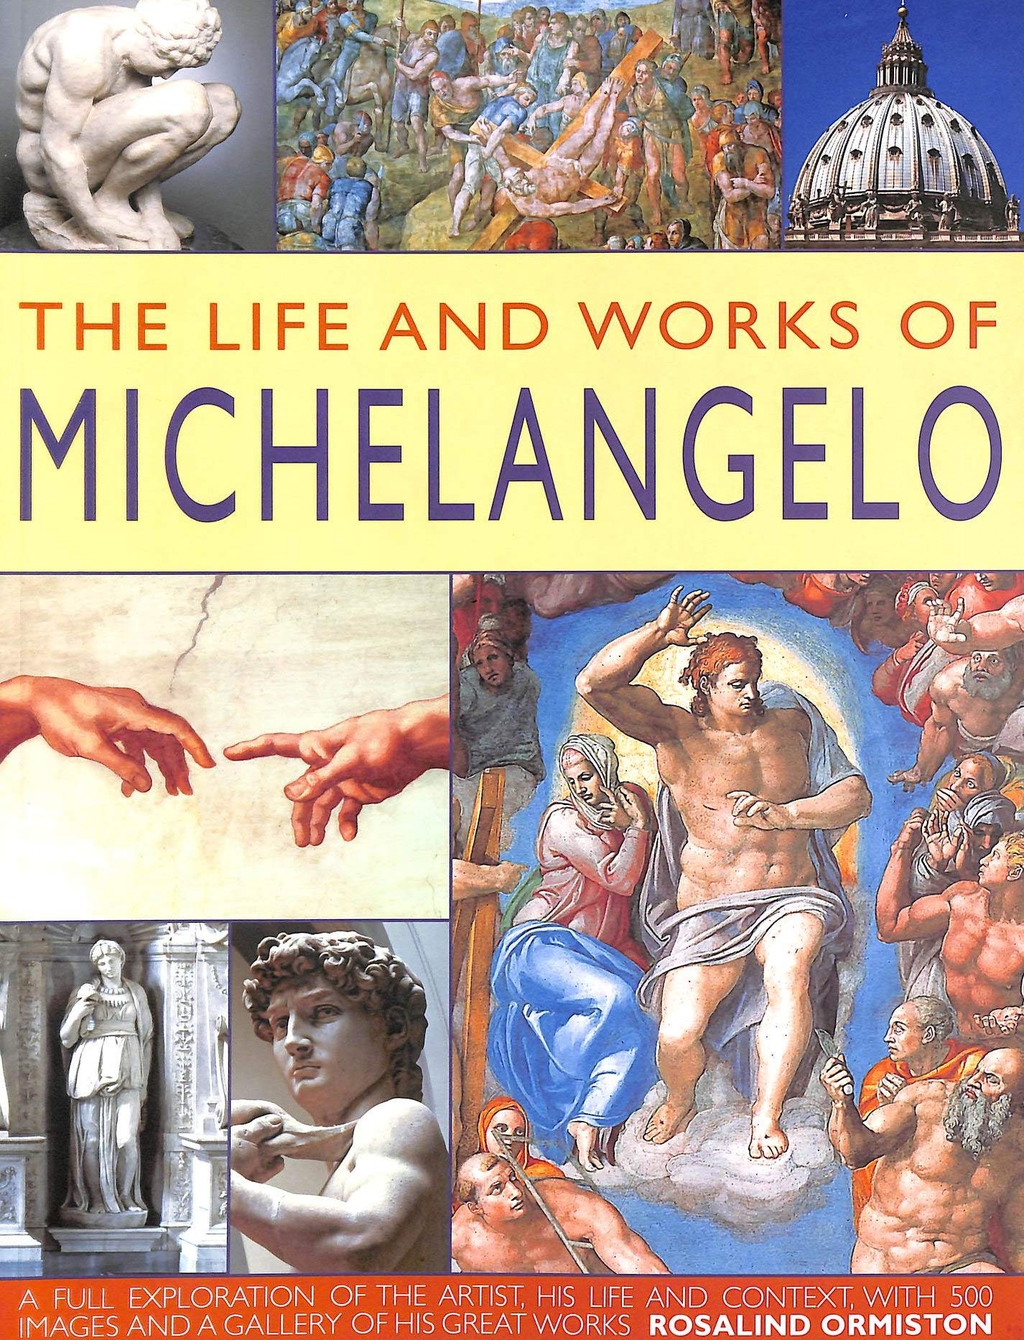 THE LIFE AND WORKS OF MICHELANGELO